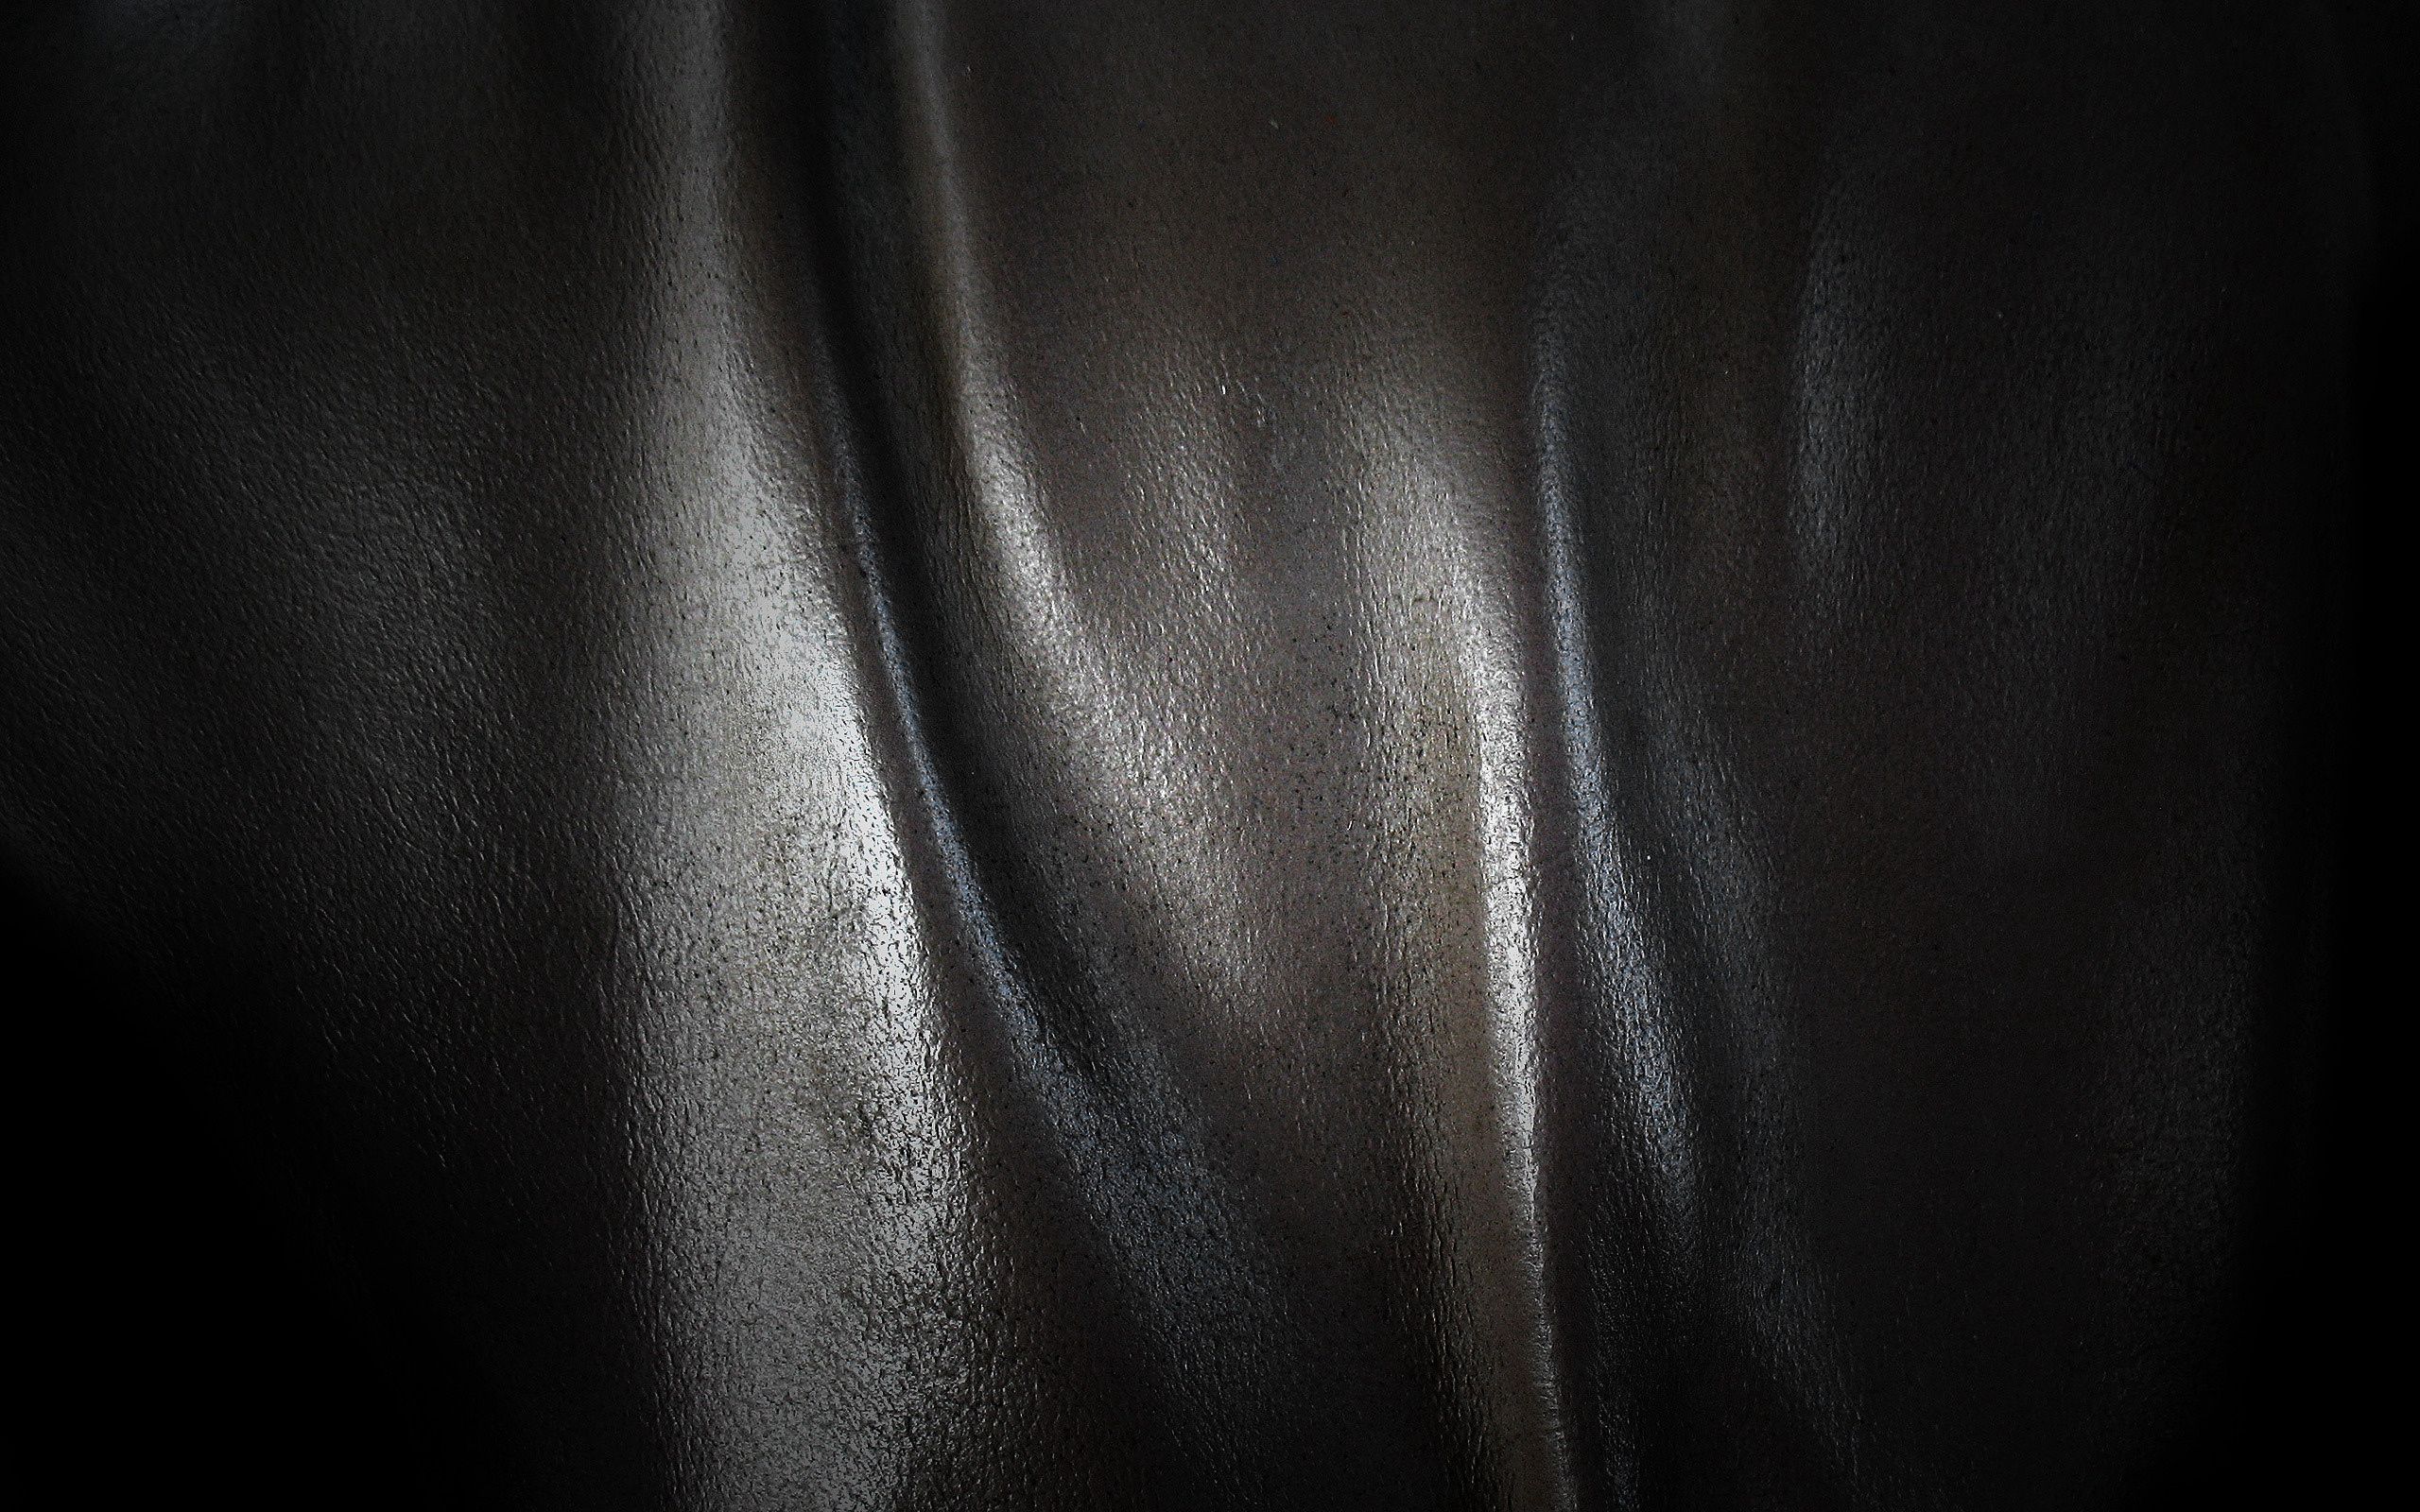 texture, textures, surface, shadow, wavy, leather, skin